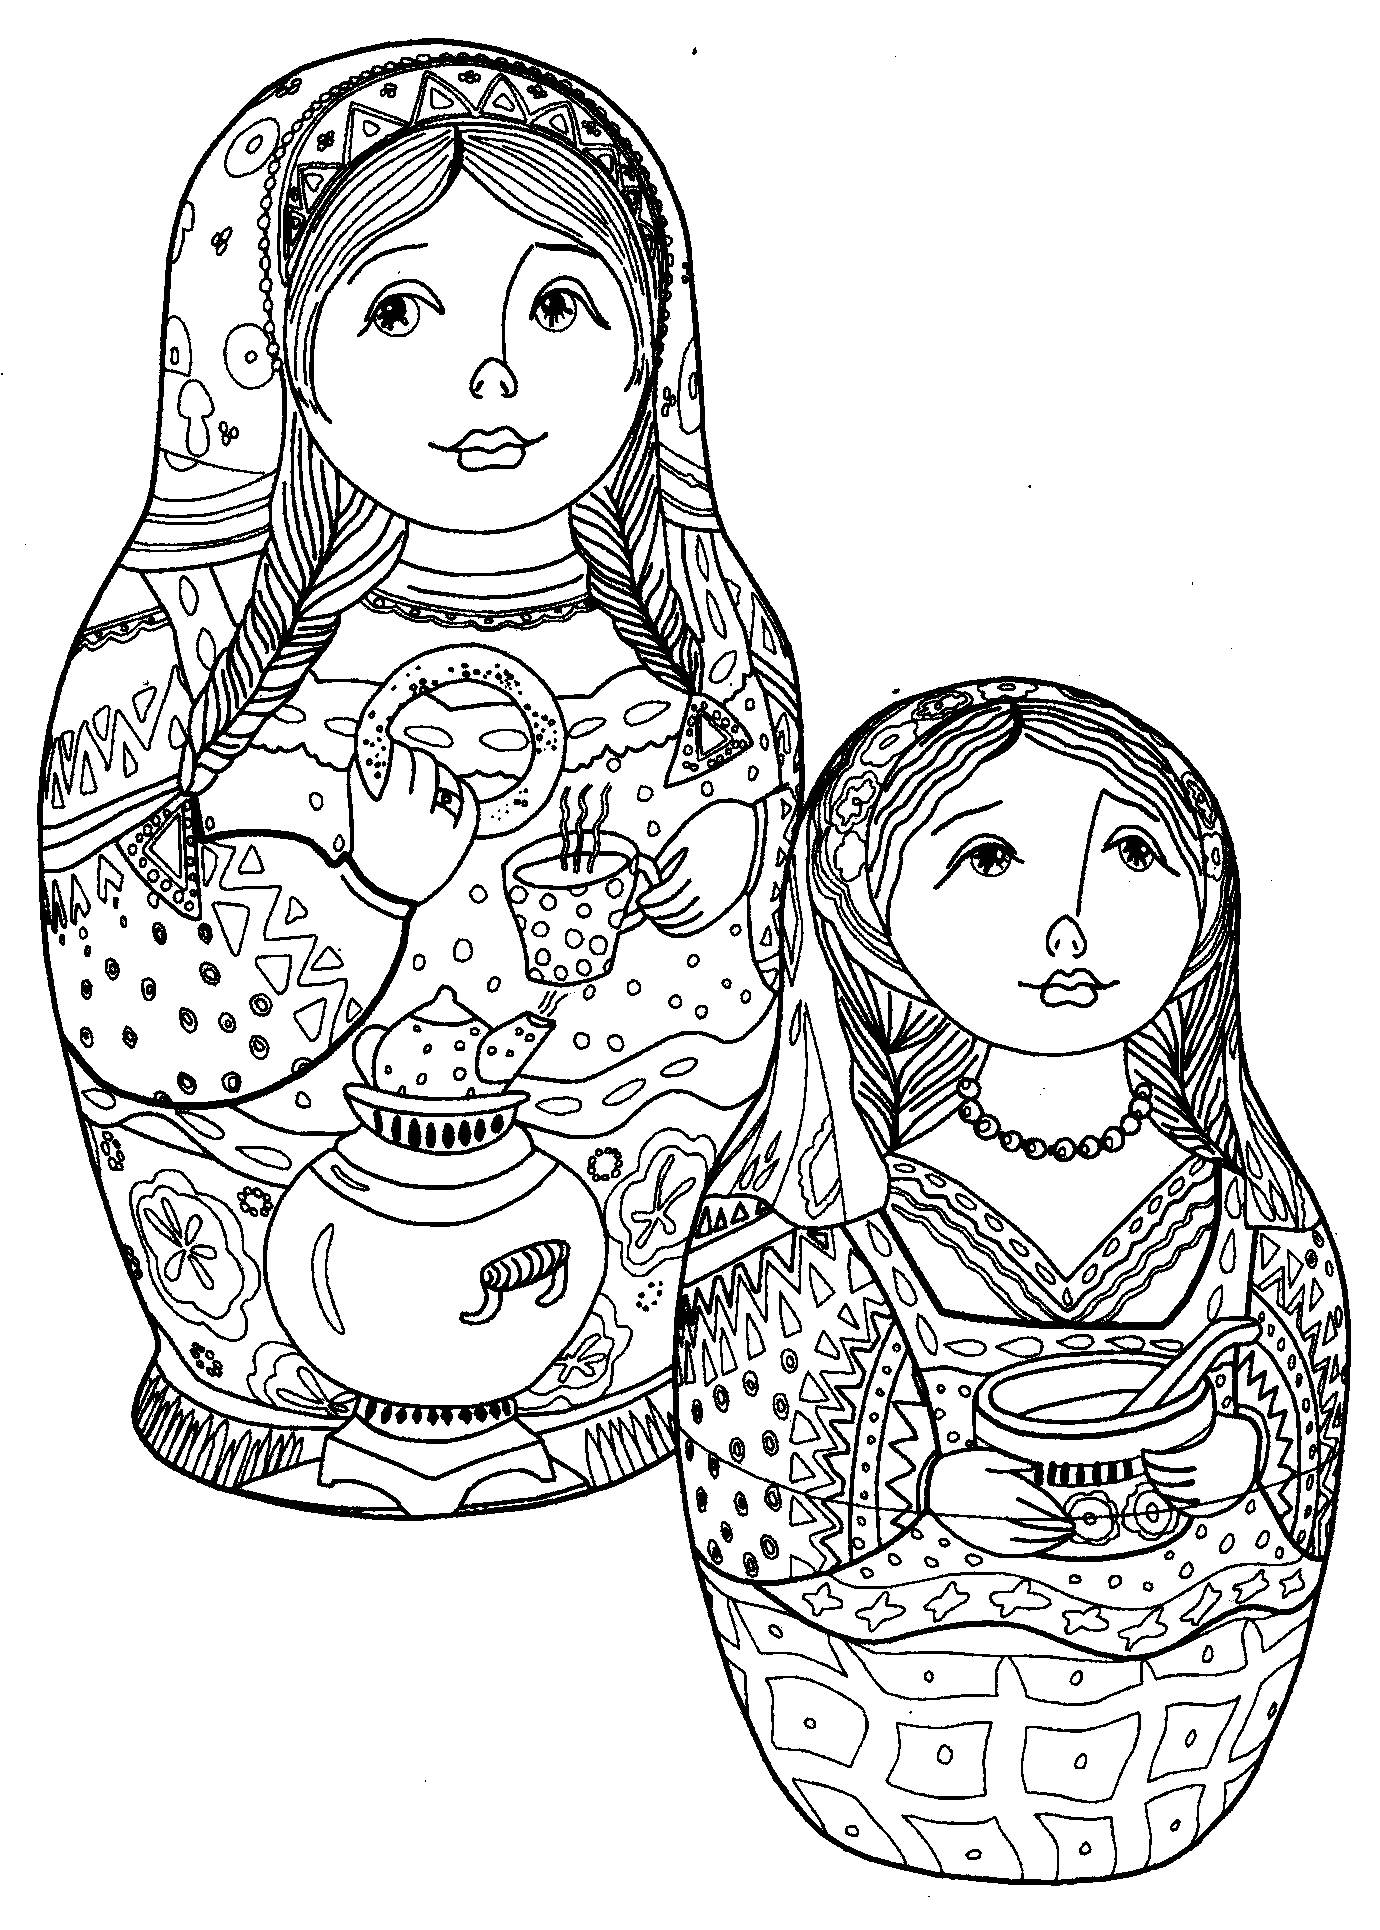 Photo Children's coloring book with matryoshka